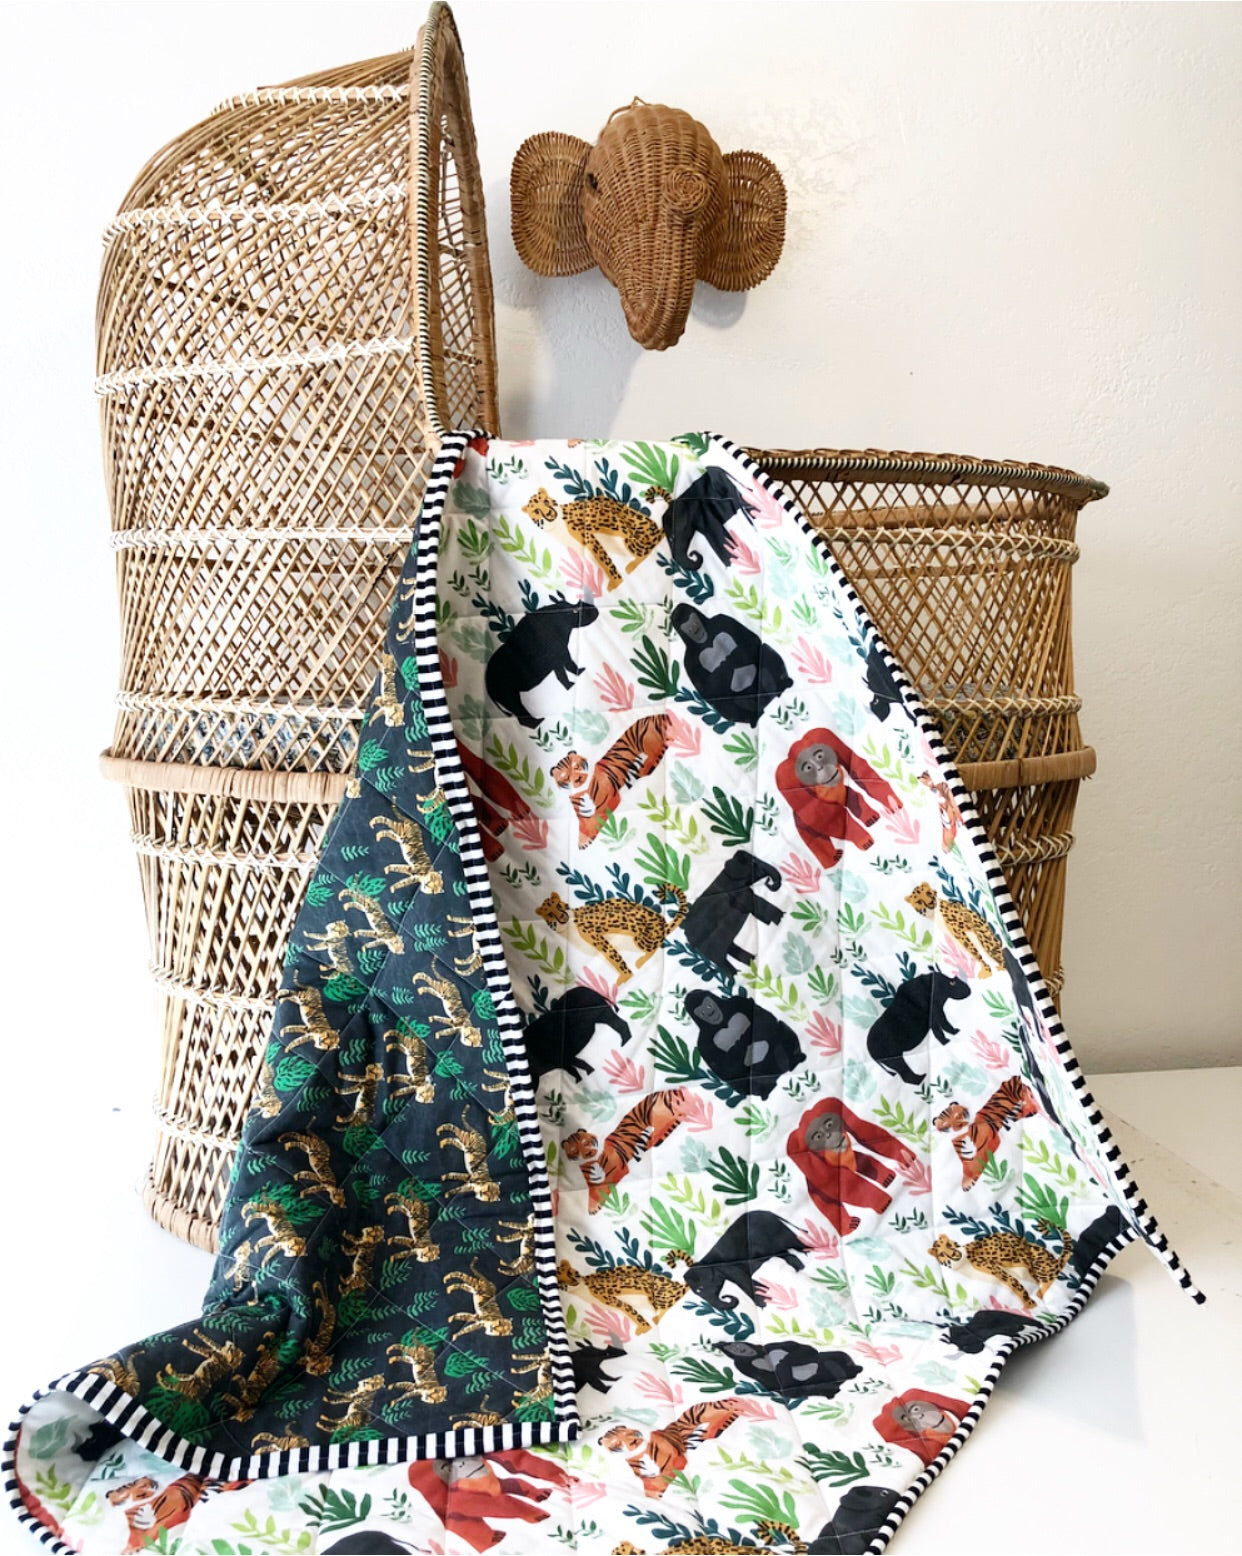 It's a Jungle Out There Safari Wholecloth Baby Quilt - Made to Order | Wild Littles